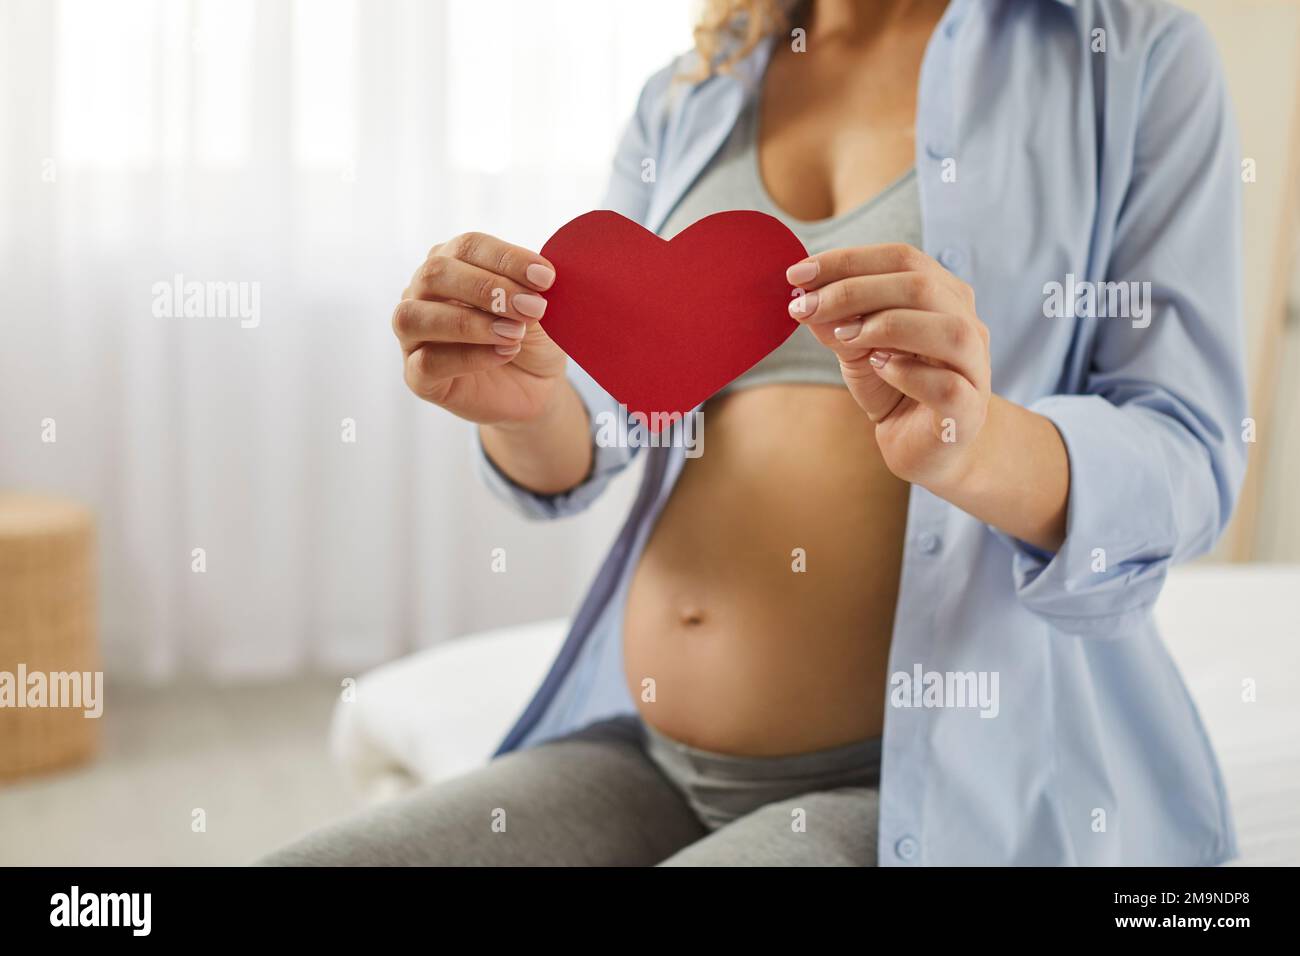 Happy loving young mother who is expecting a baby holding a paper heart in her hands Stock Photo